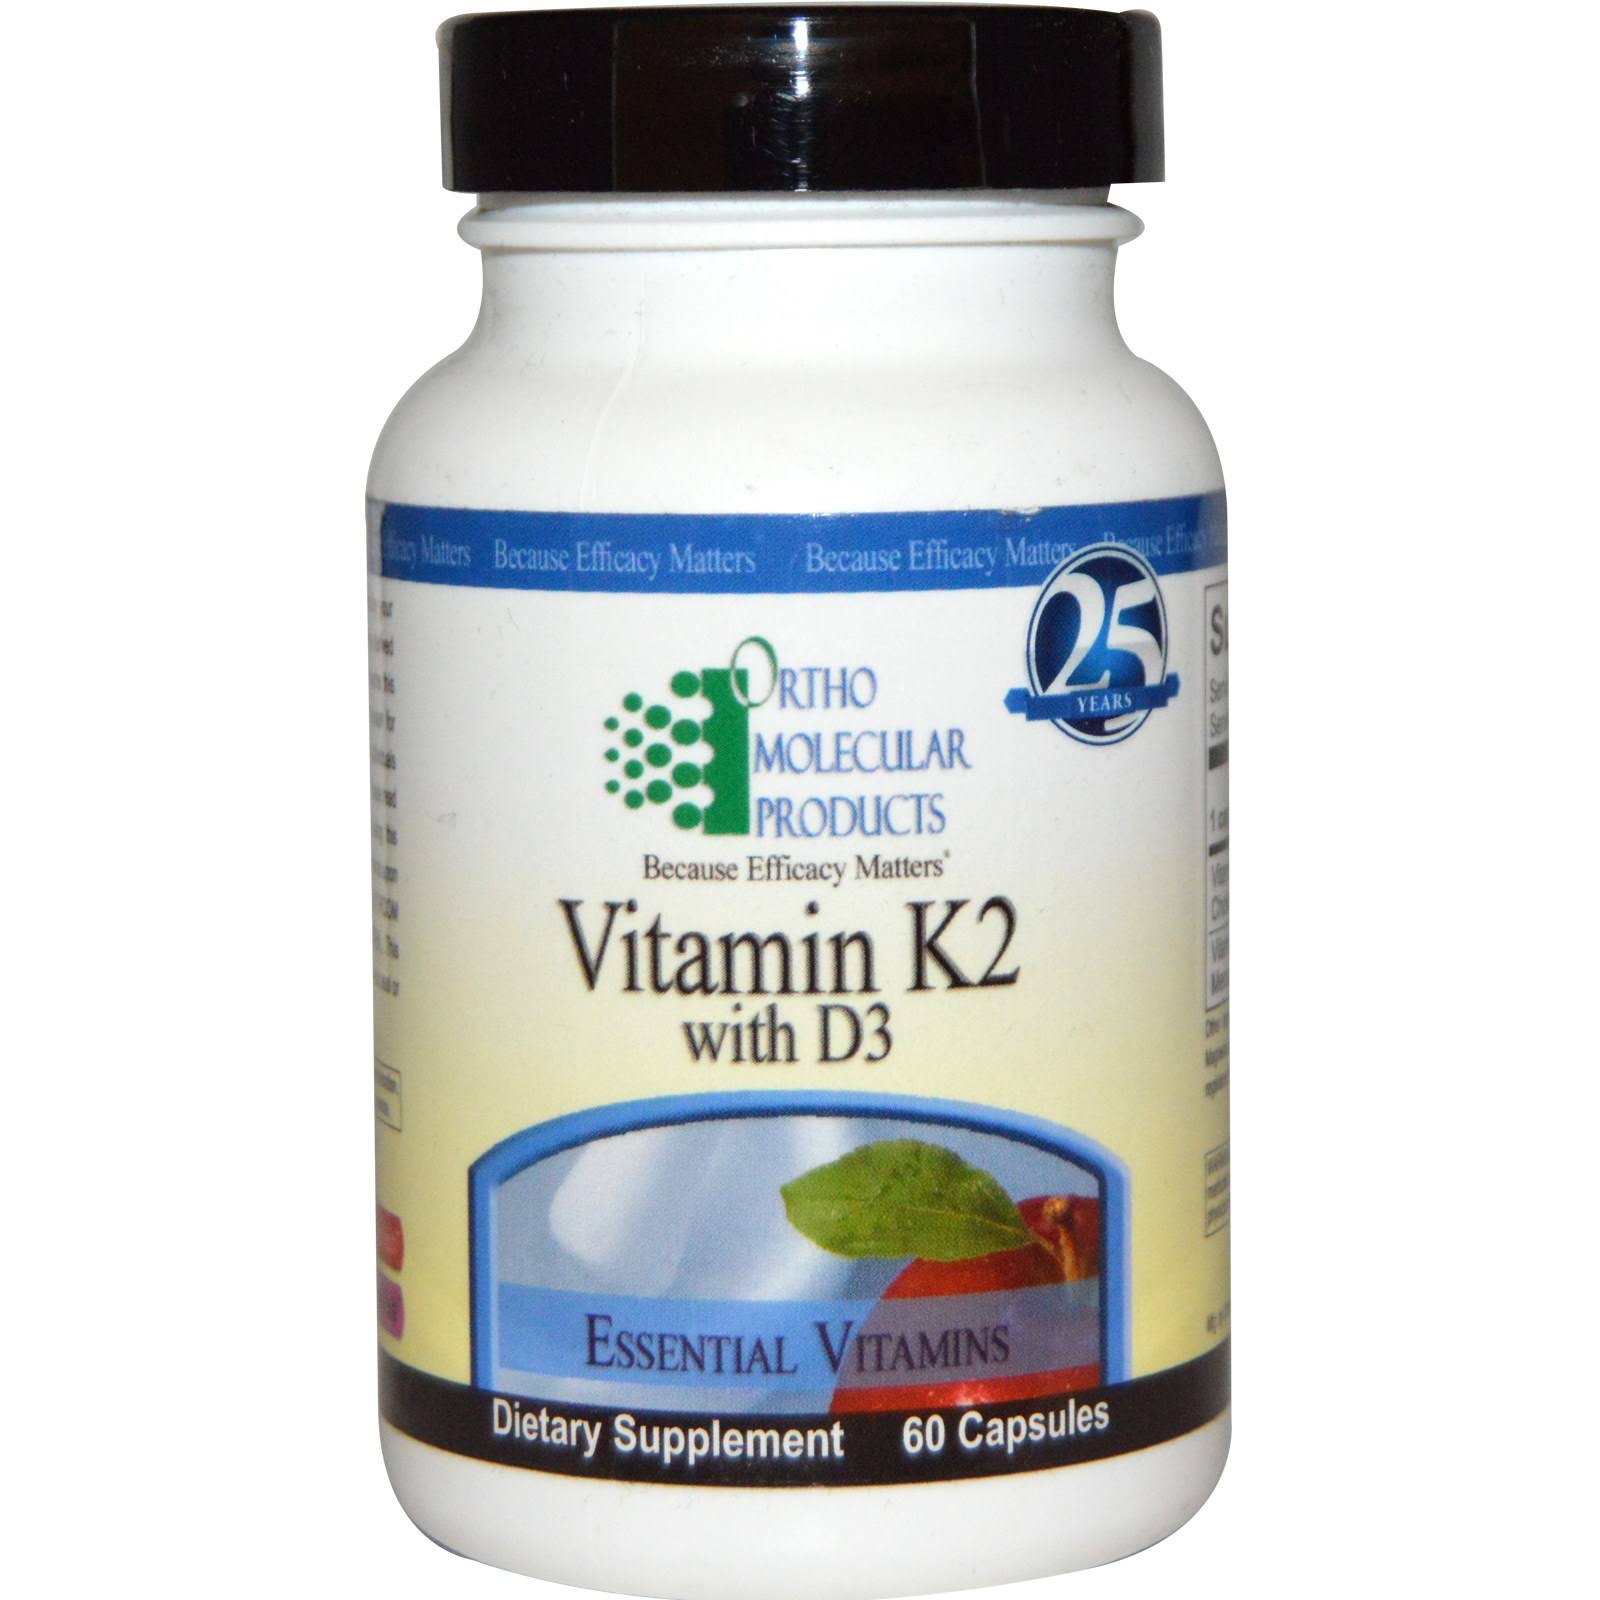 Ortho Molecular Products Vitamin K2 with D3 Supplement - 60ct